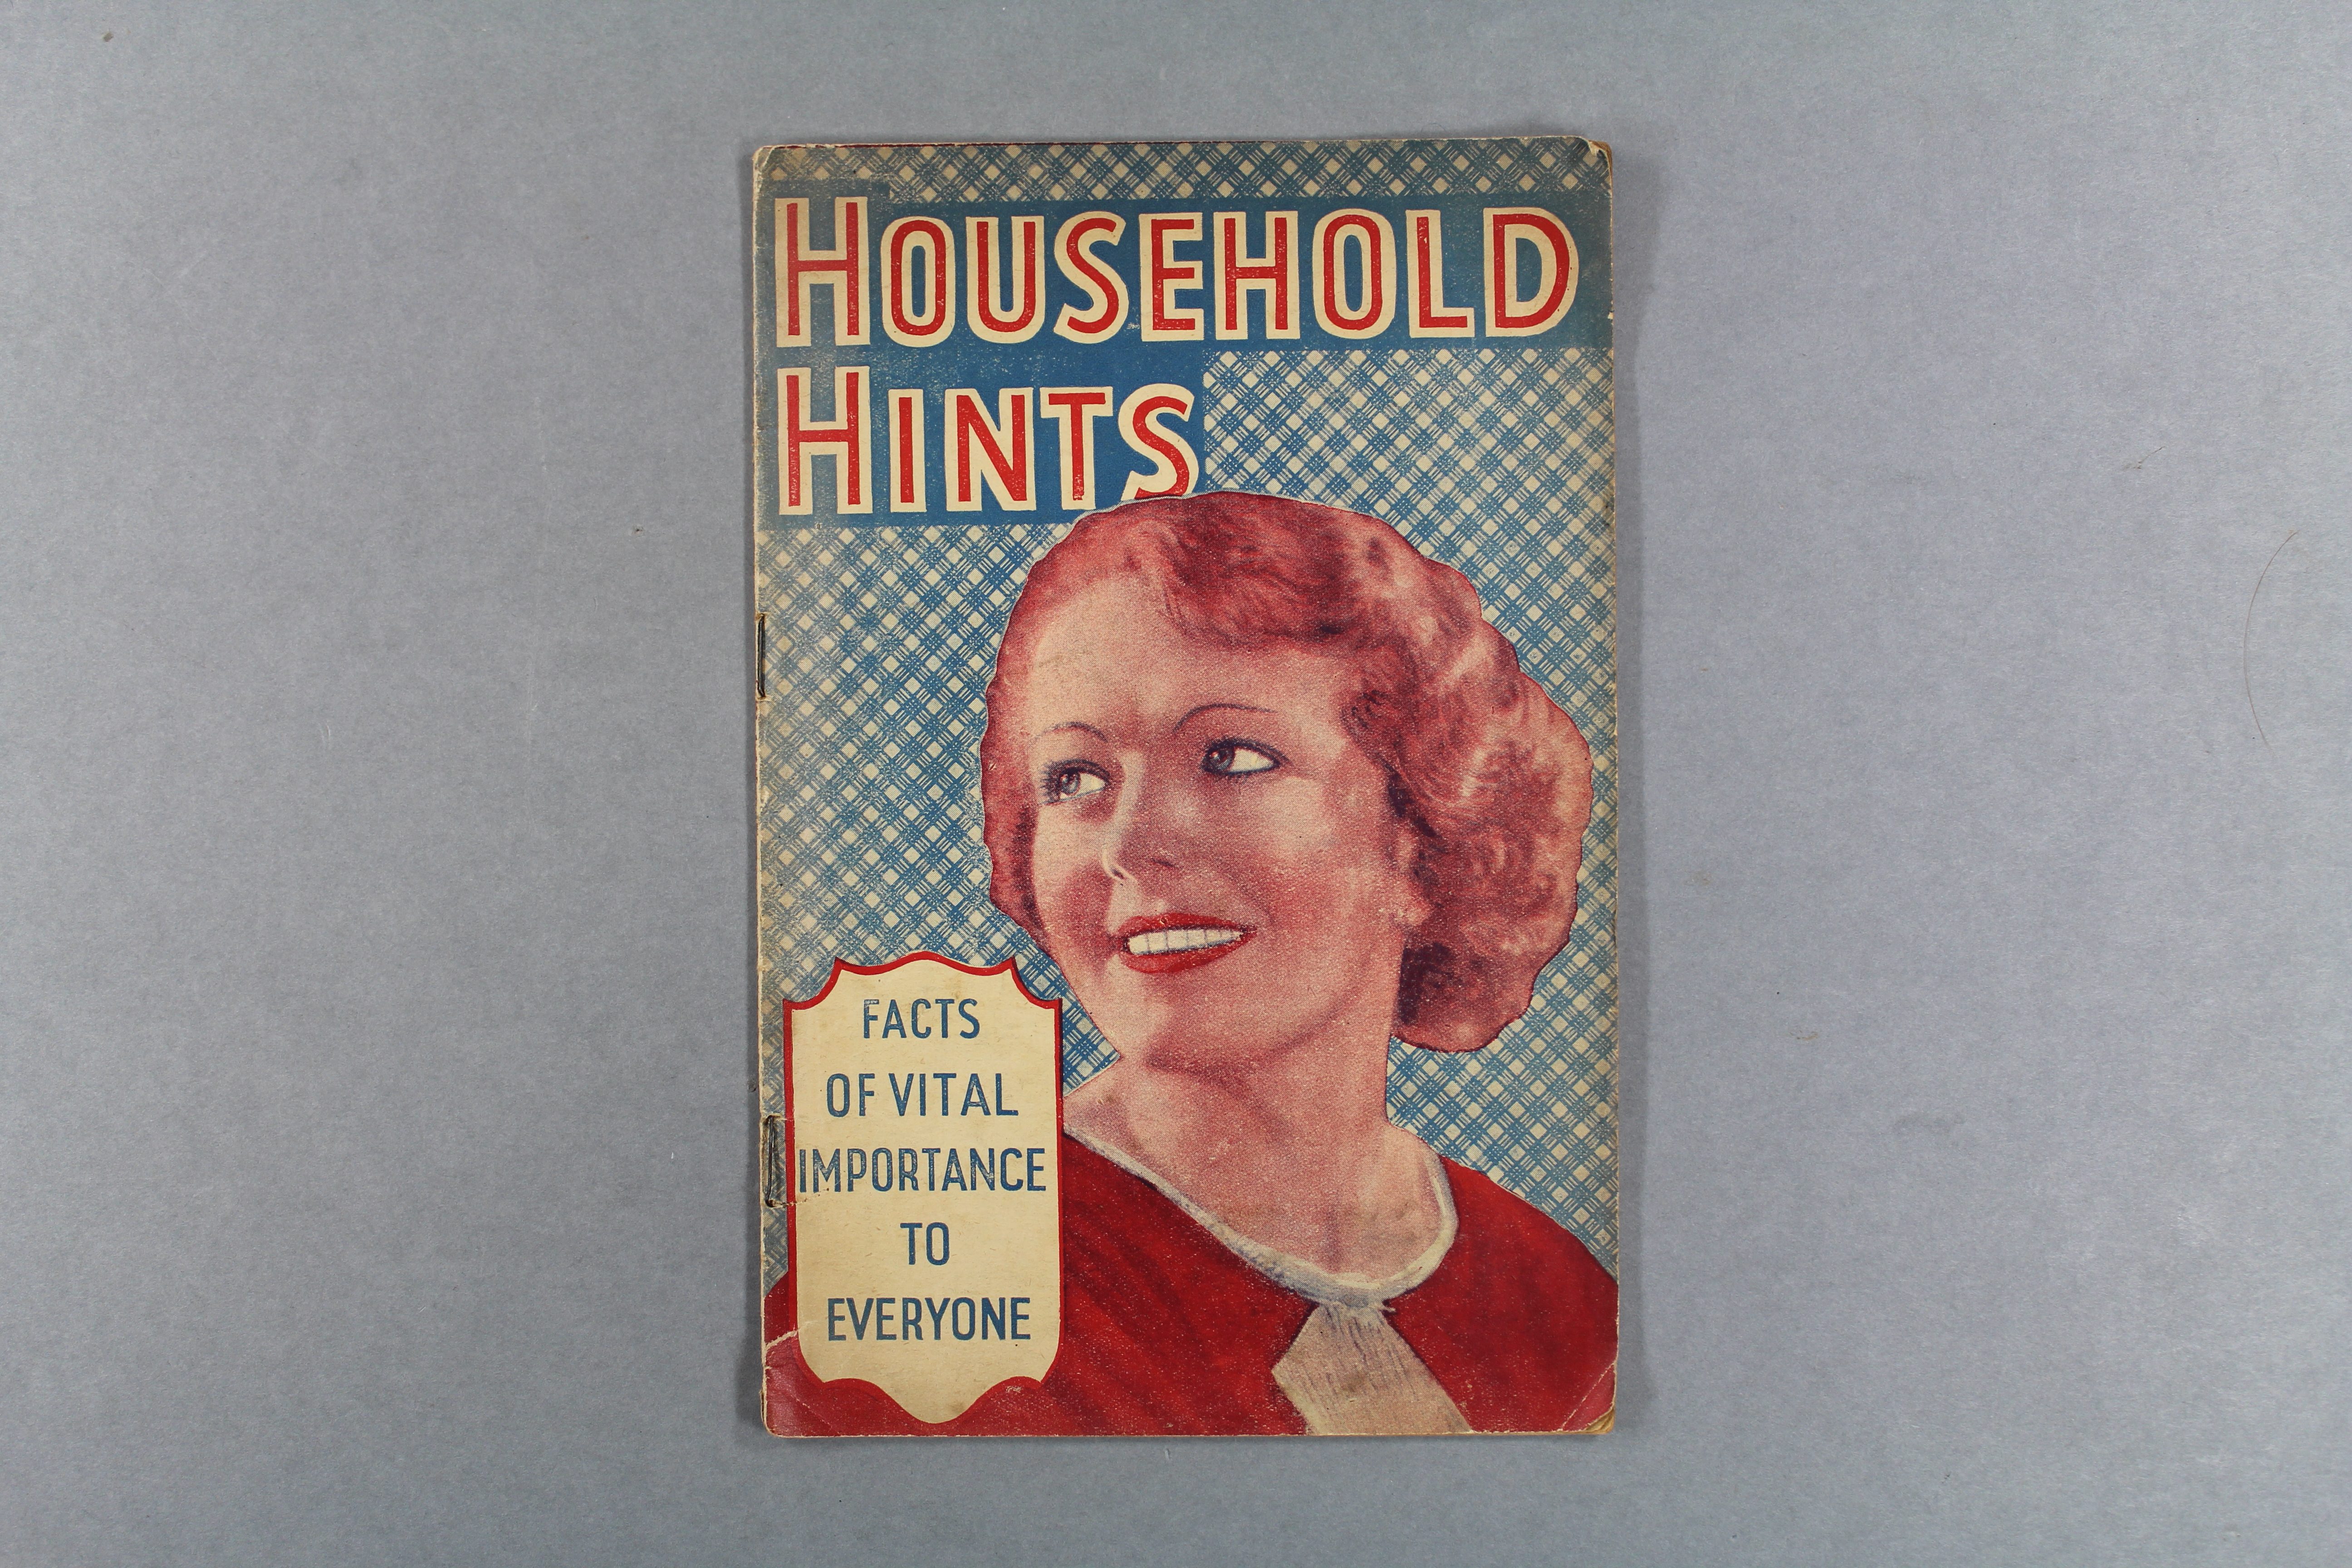 Household Hints book cover featuring a smailing woman in a 40s hairstyle. The cover is printed in shades of red and blue.